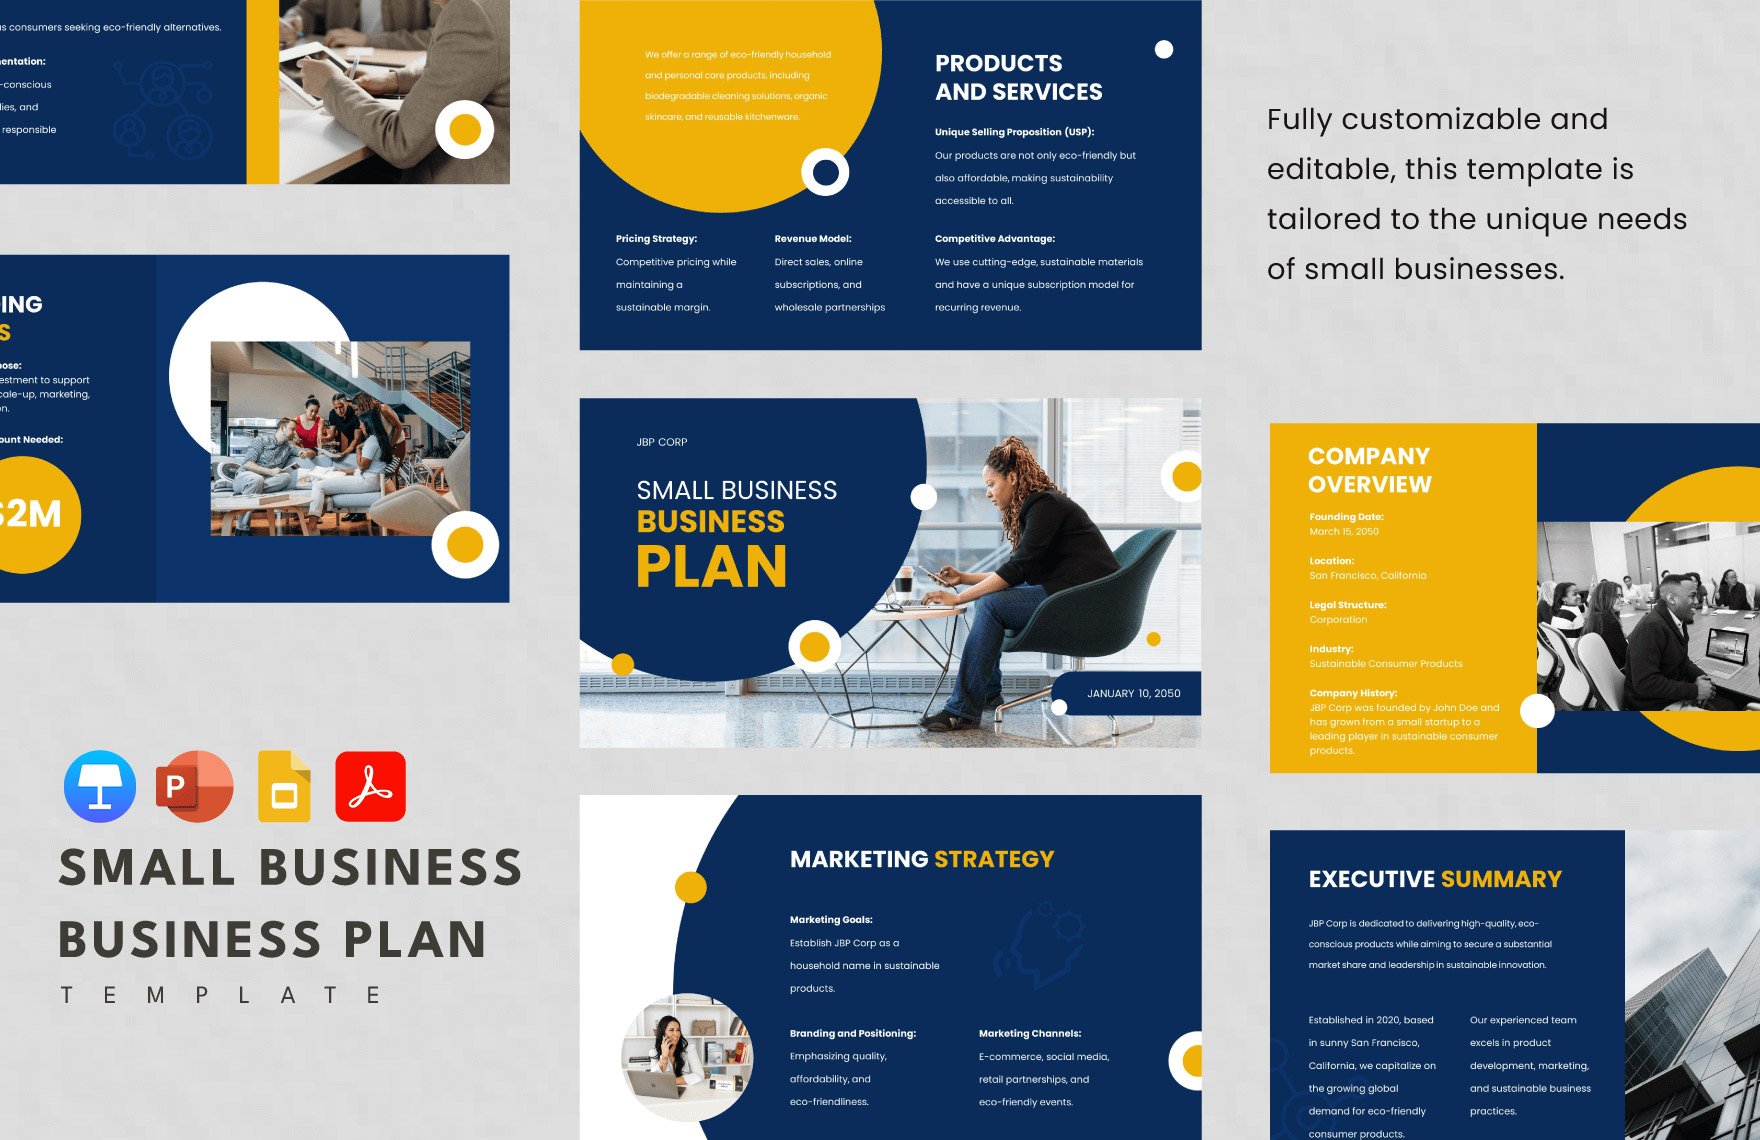 Small Business Business Plan Template